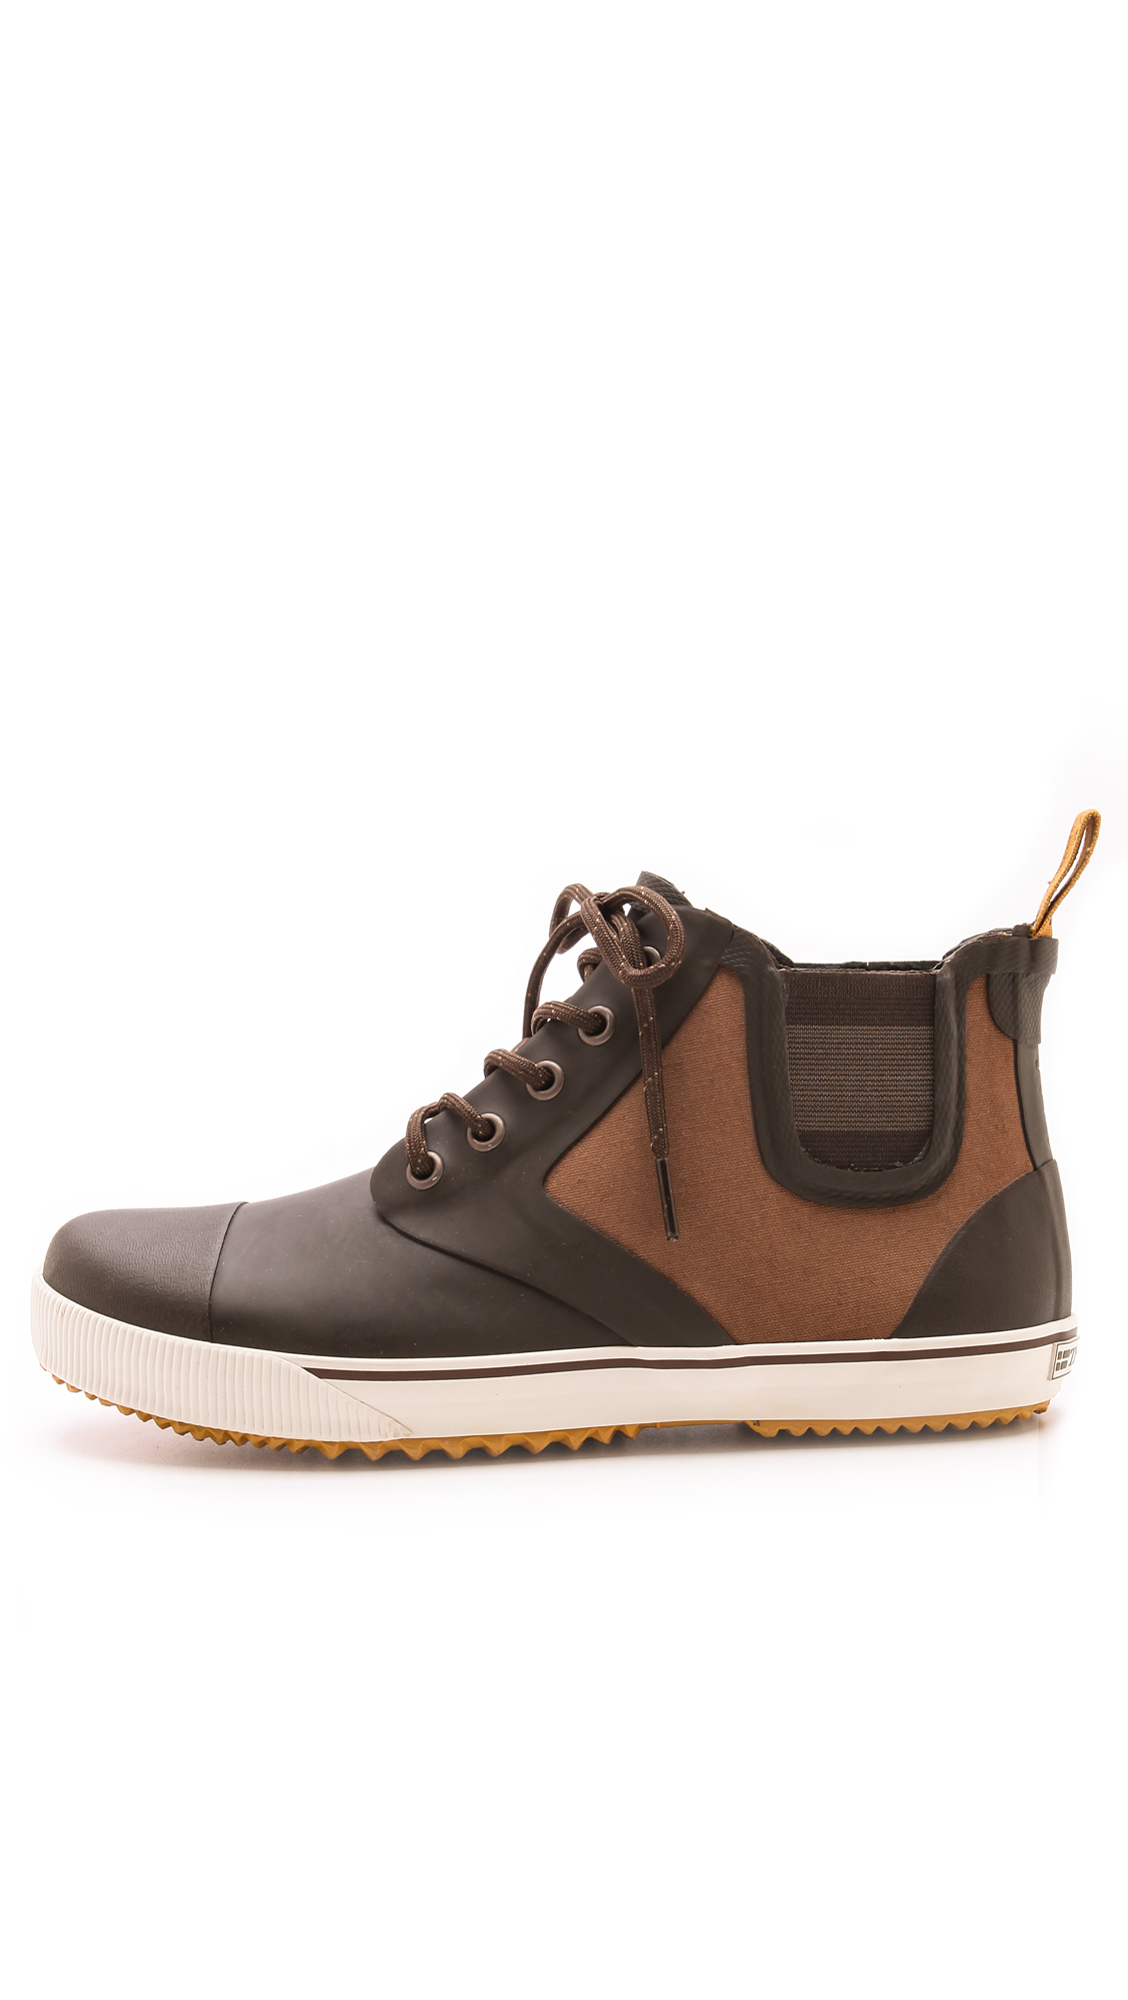 Lyst - Tretorn Gunnar Canvas Rubber Boots in Brown for Men